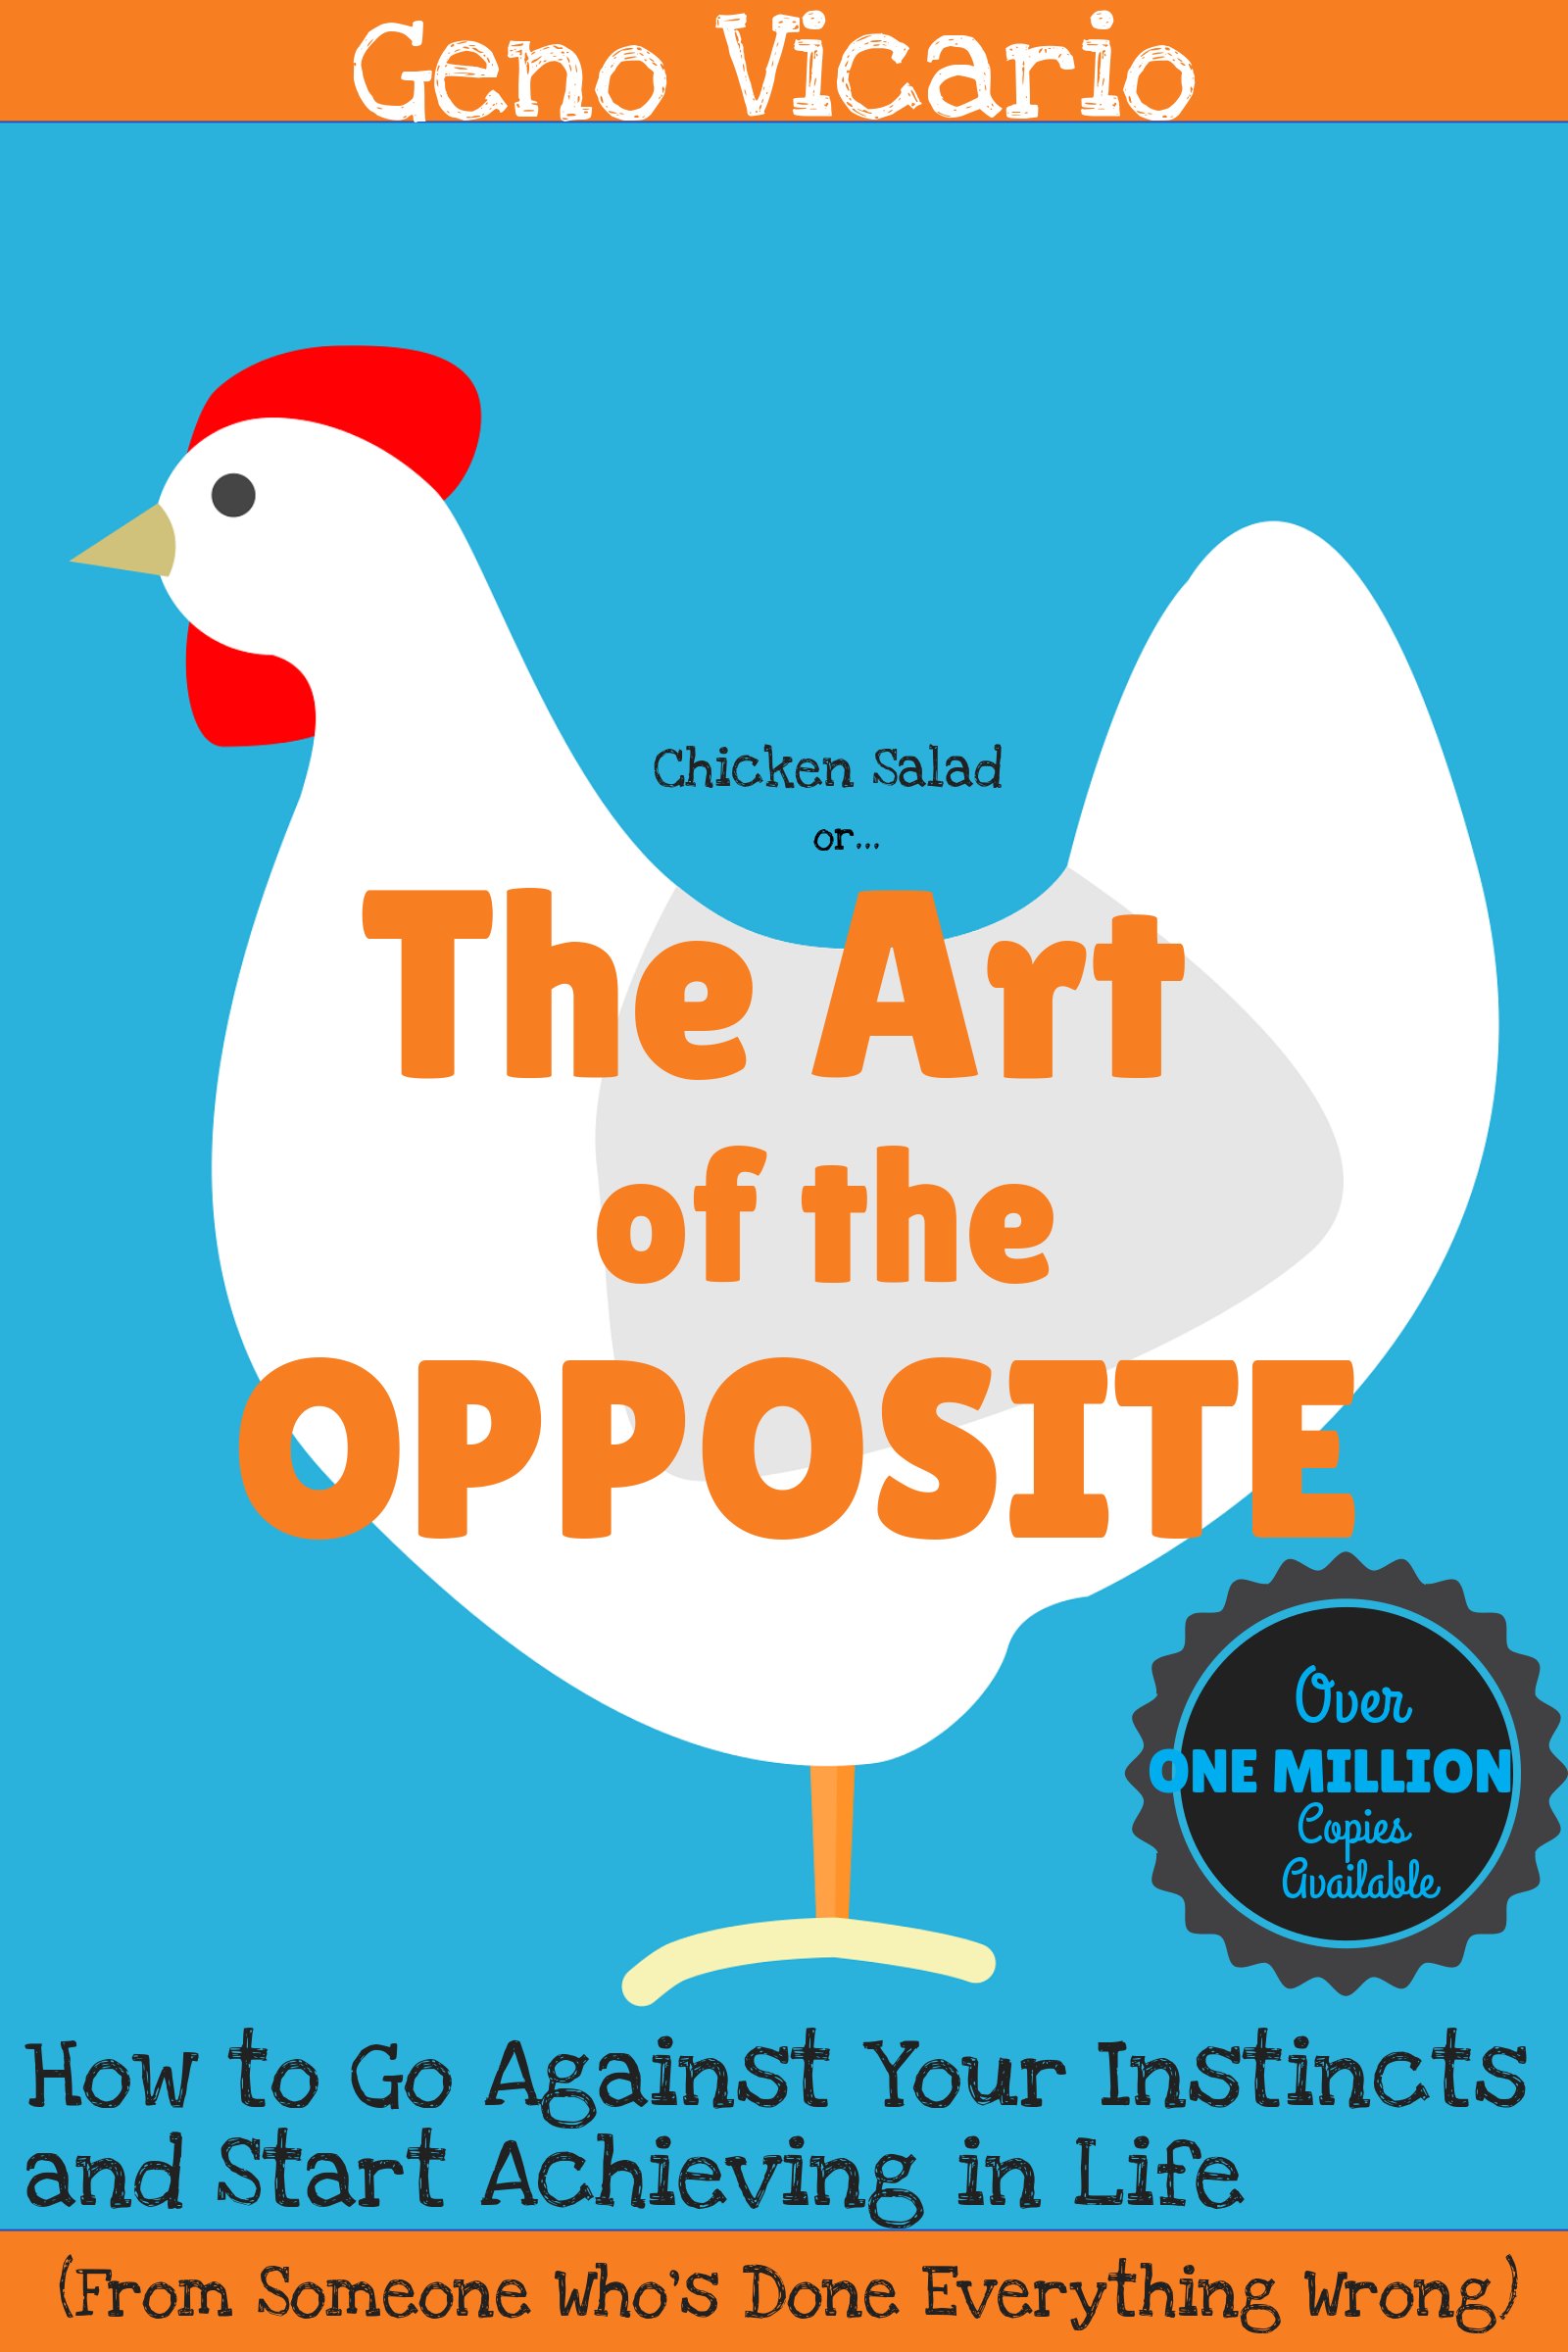 FREE: The Art of the Opposite: How to Go Against Your Instincts and Start Achieving in Life by Geno Vicario by Geno Vicario